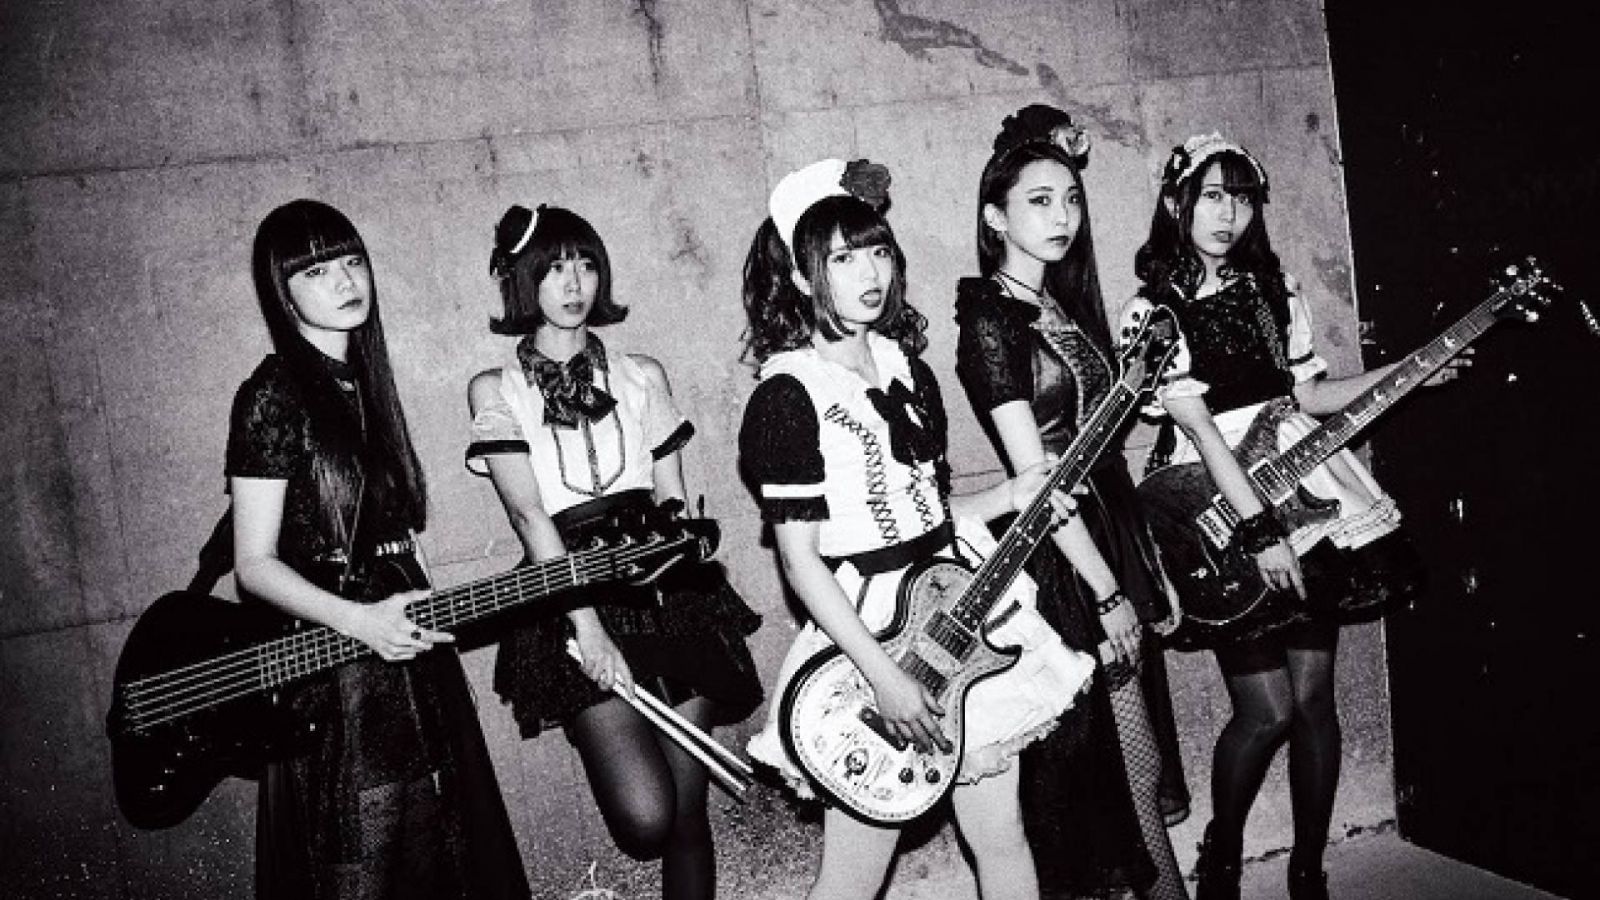 Band-maid - Start Over - Band Maid World Domination , HD Wallpaper & Backgrounds